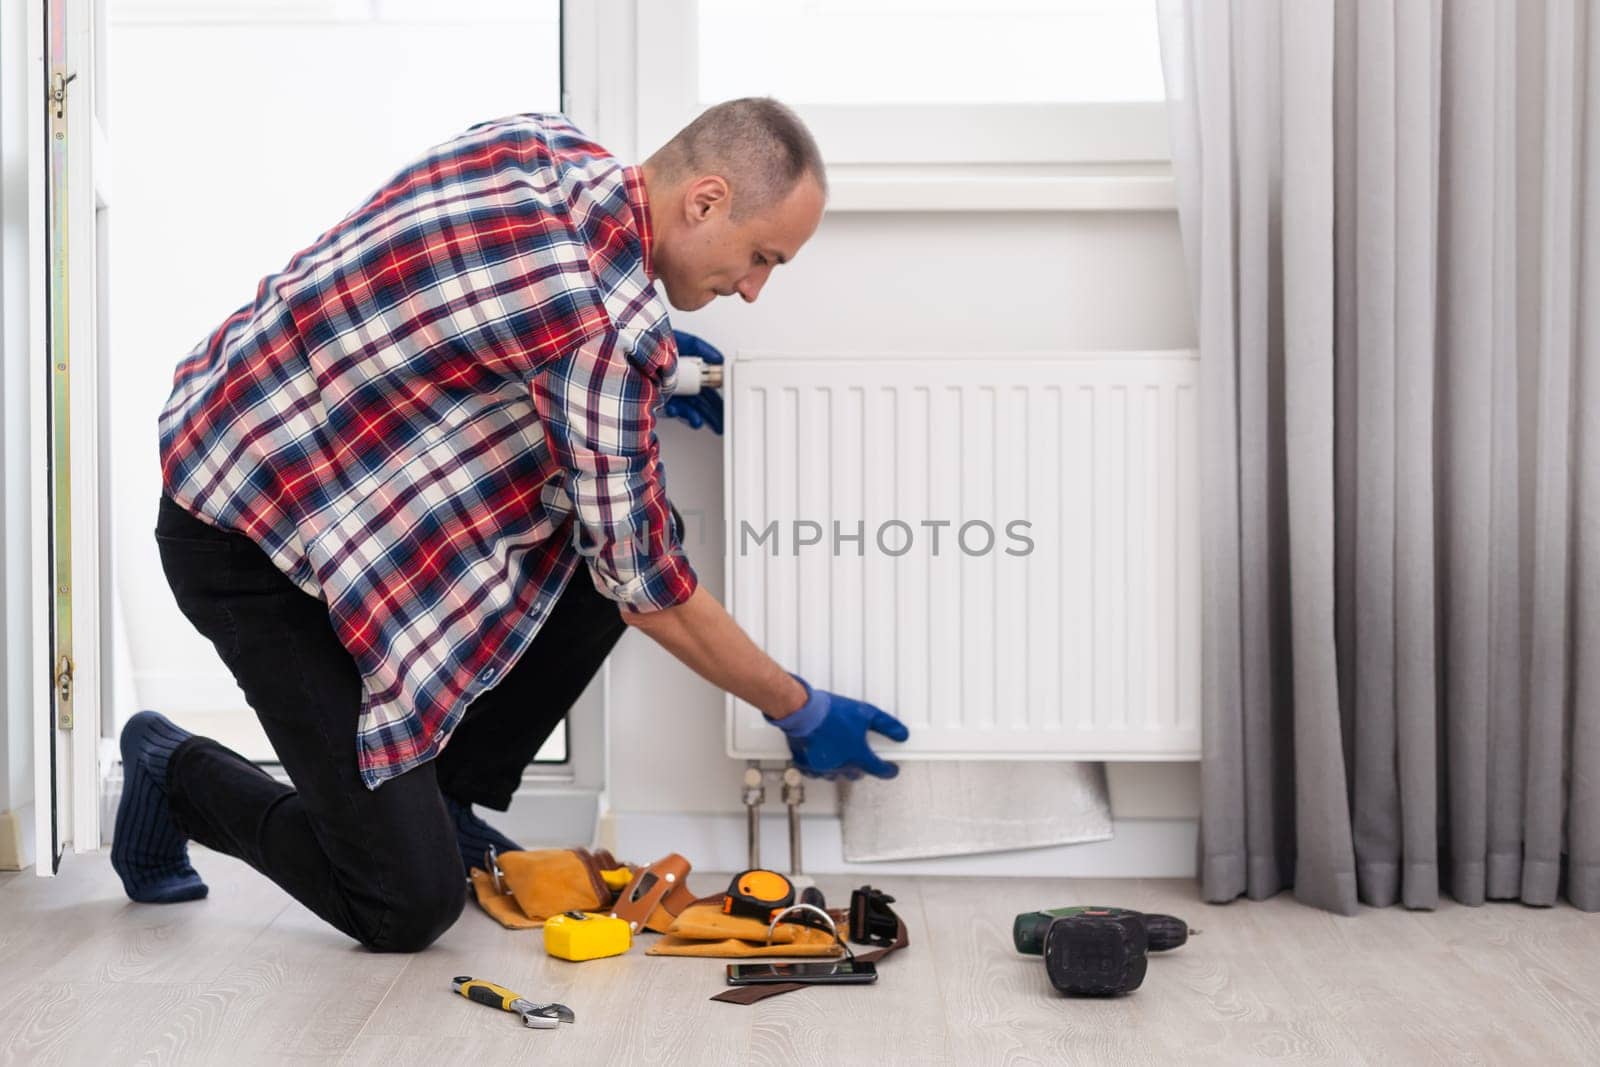 Repair heating radiator close-up. man repairing radiator with wrench. Removing air from the radiator. High quality photo